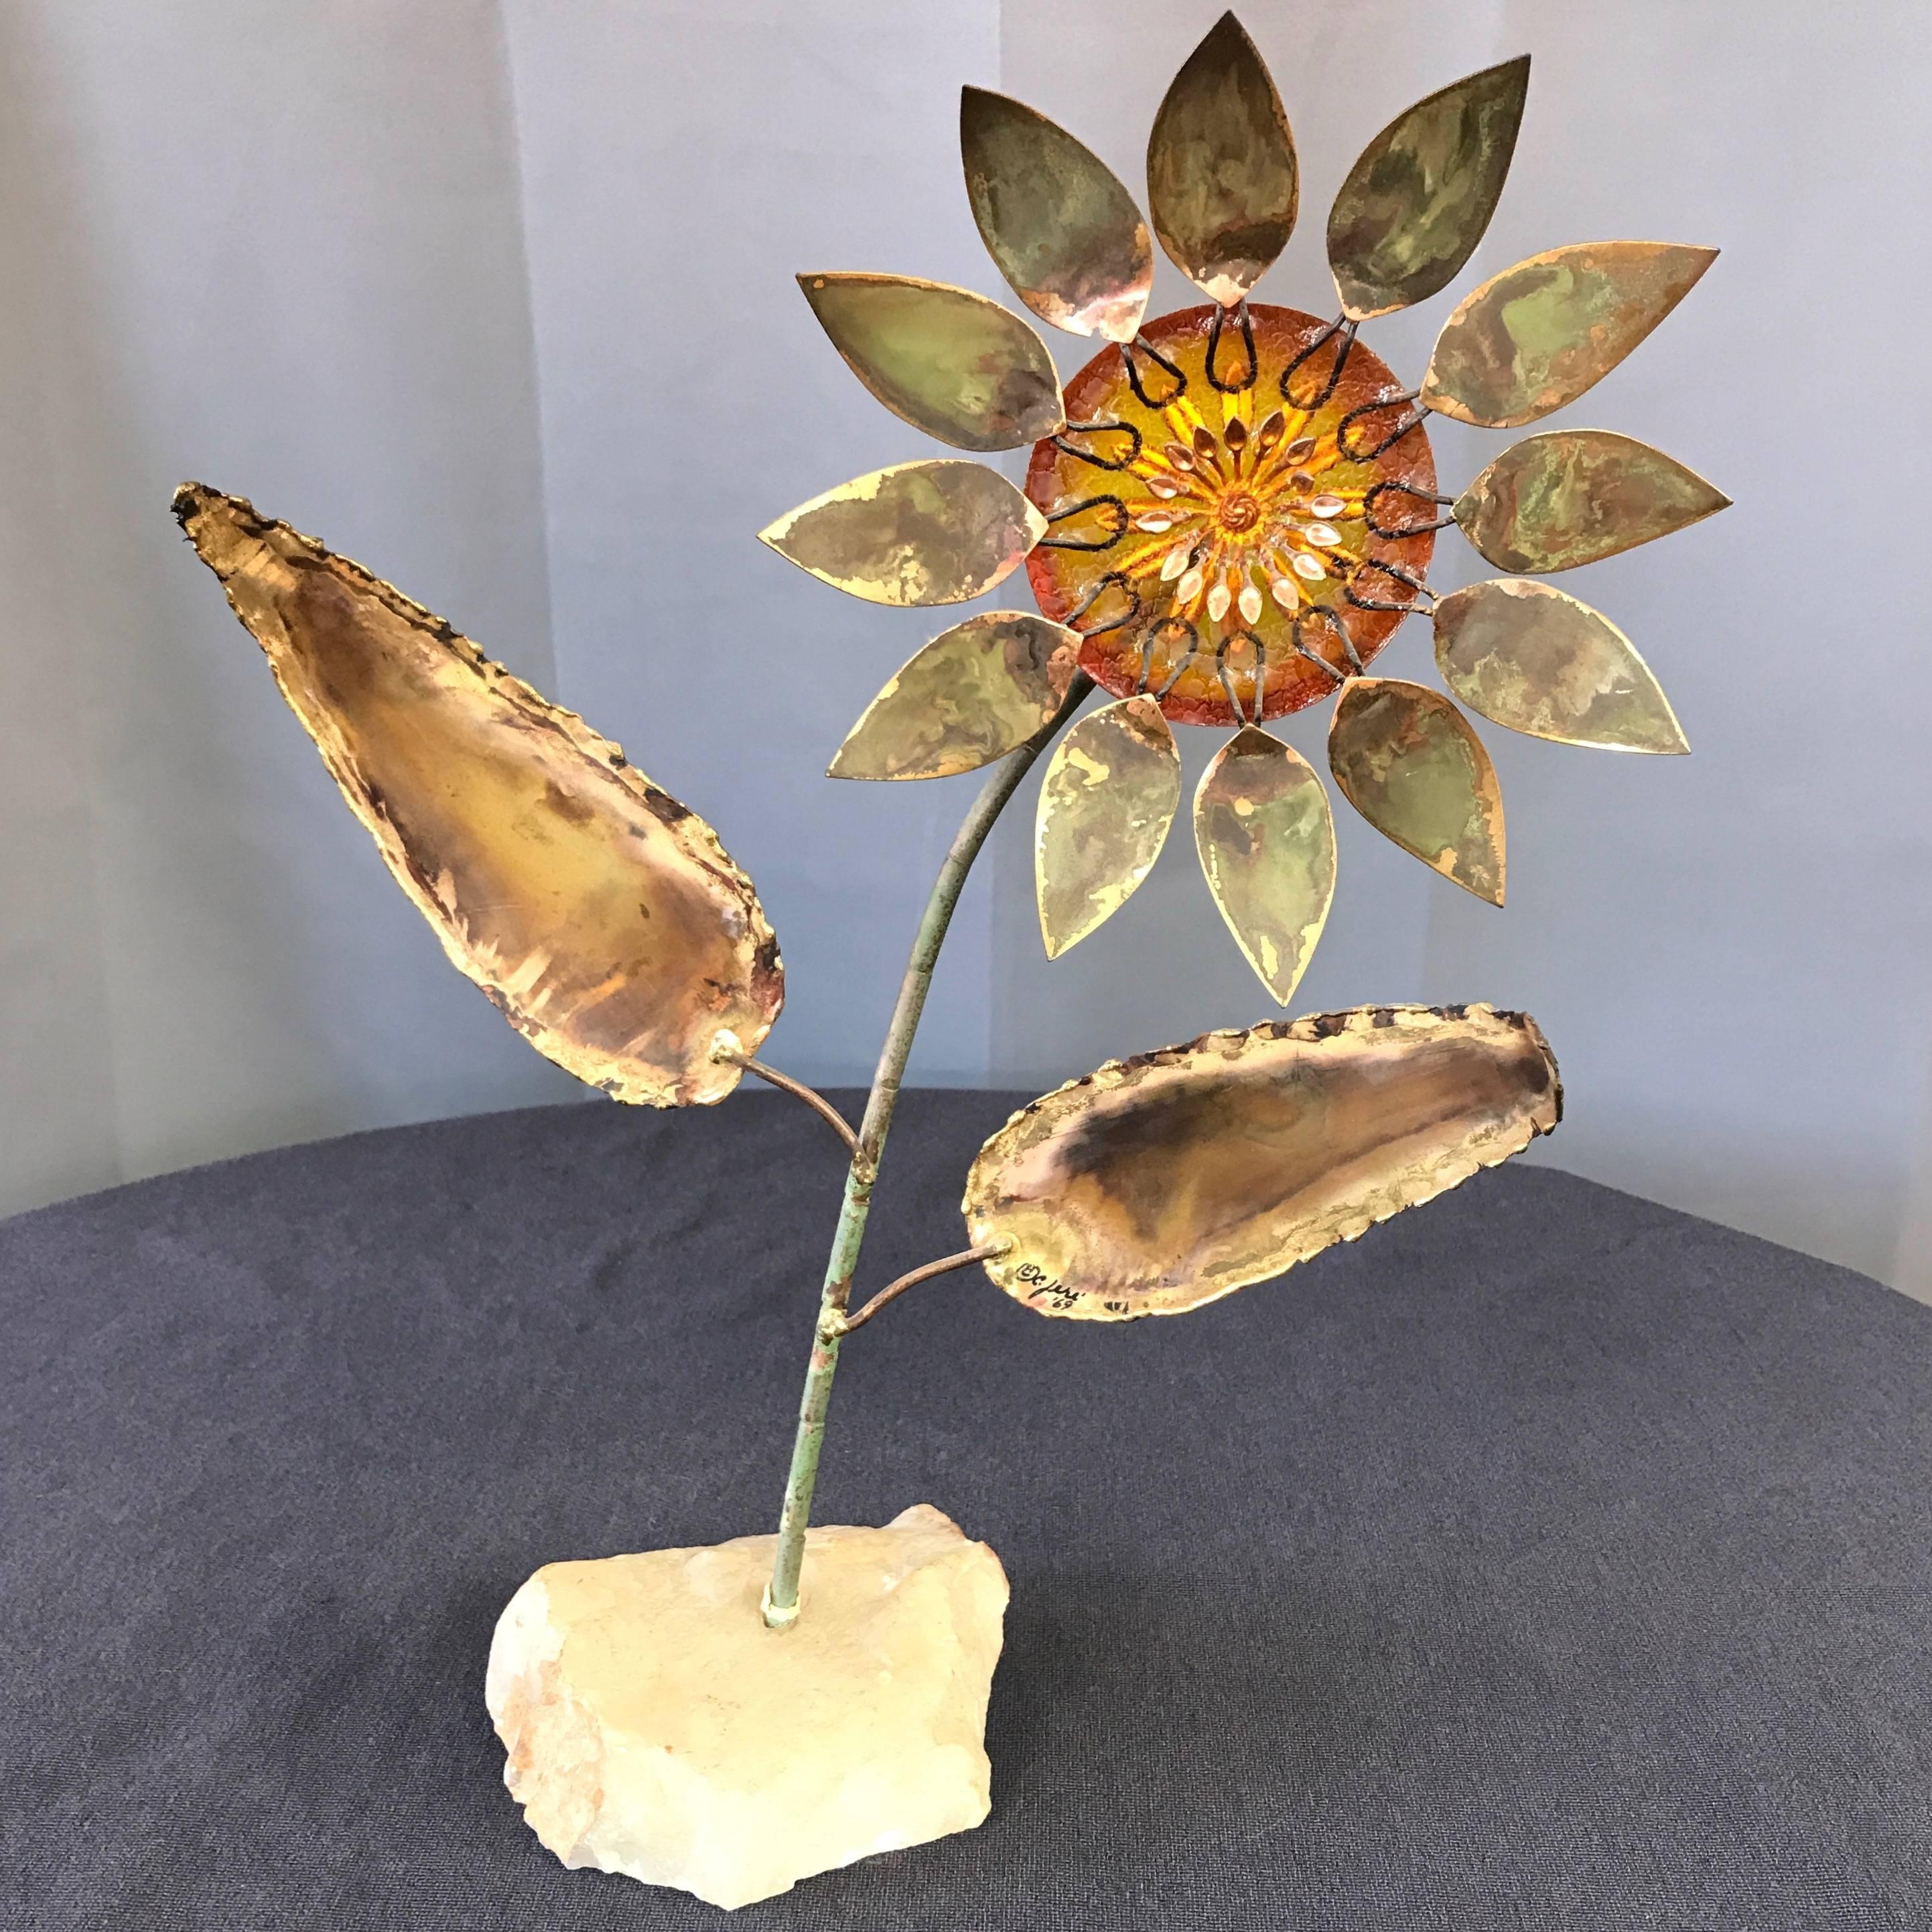 A signed and dated rare sunflower sculpture in brass, copper, and resin with onyx base by midcentury California artist collaborative Curtis Jére.

Stylized brass petals and copper seeds are set in translucent amber cast resin. Copper stem with